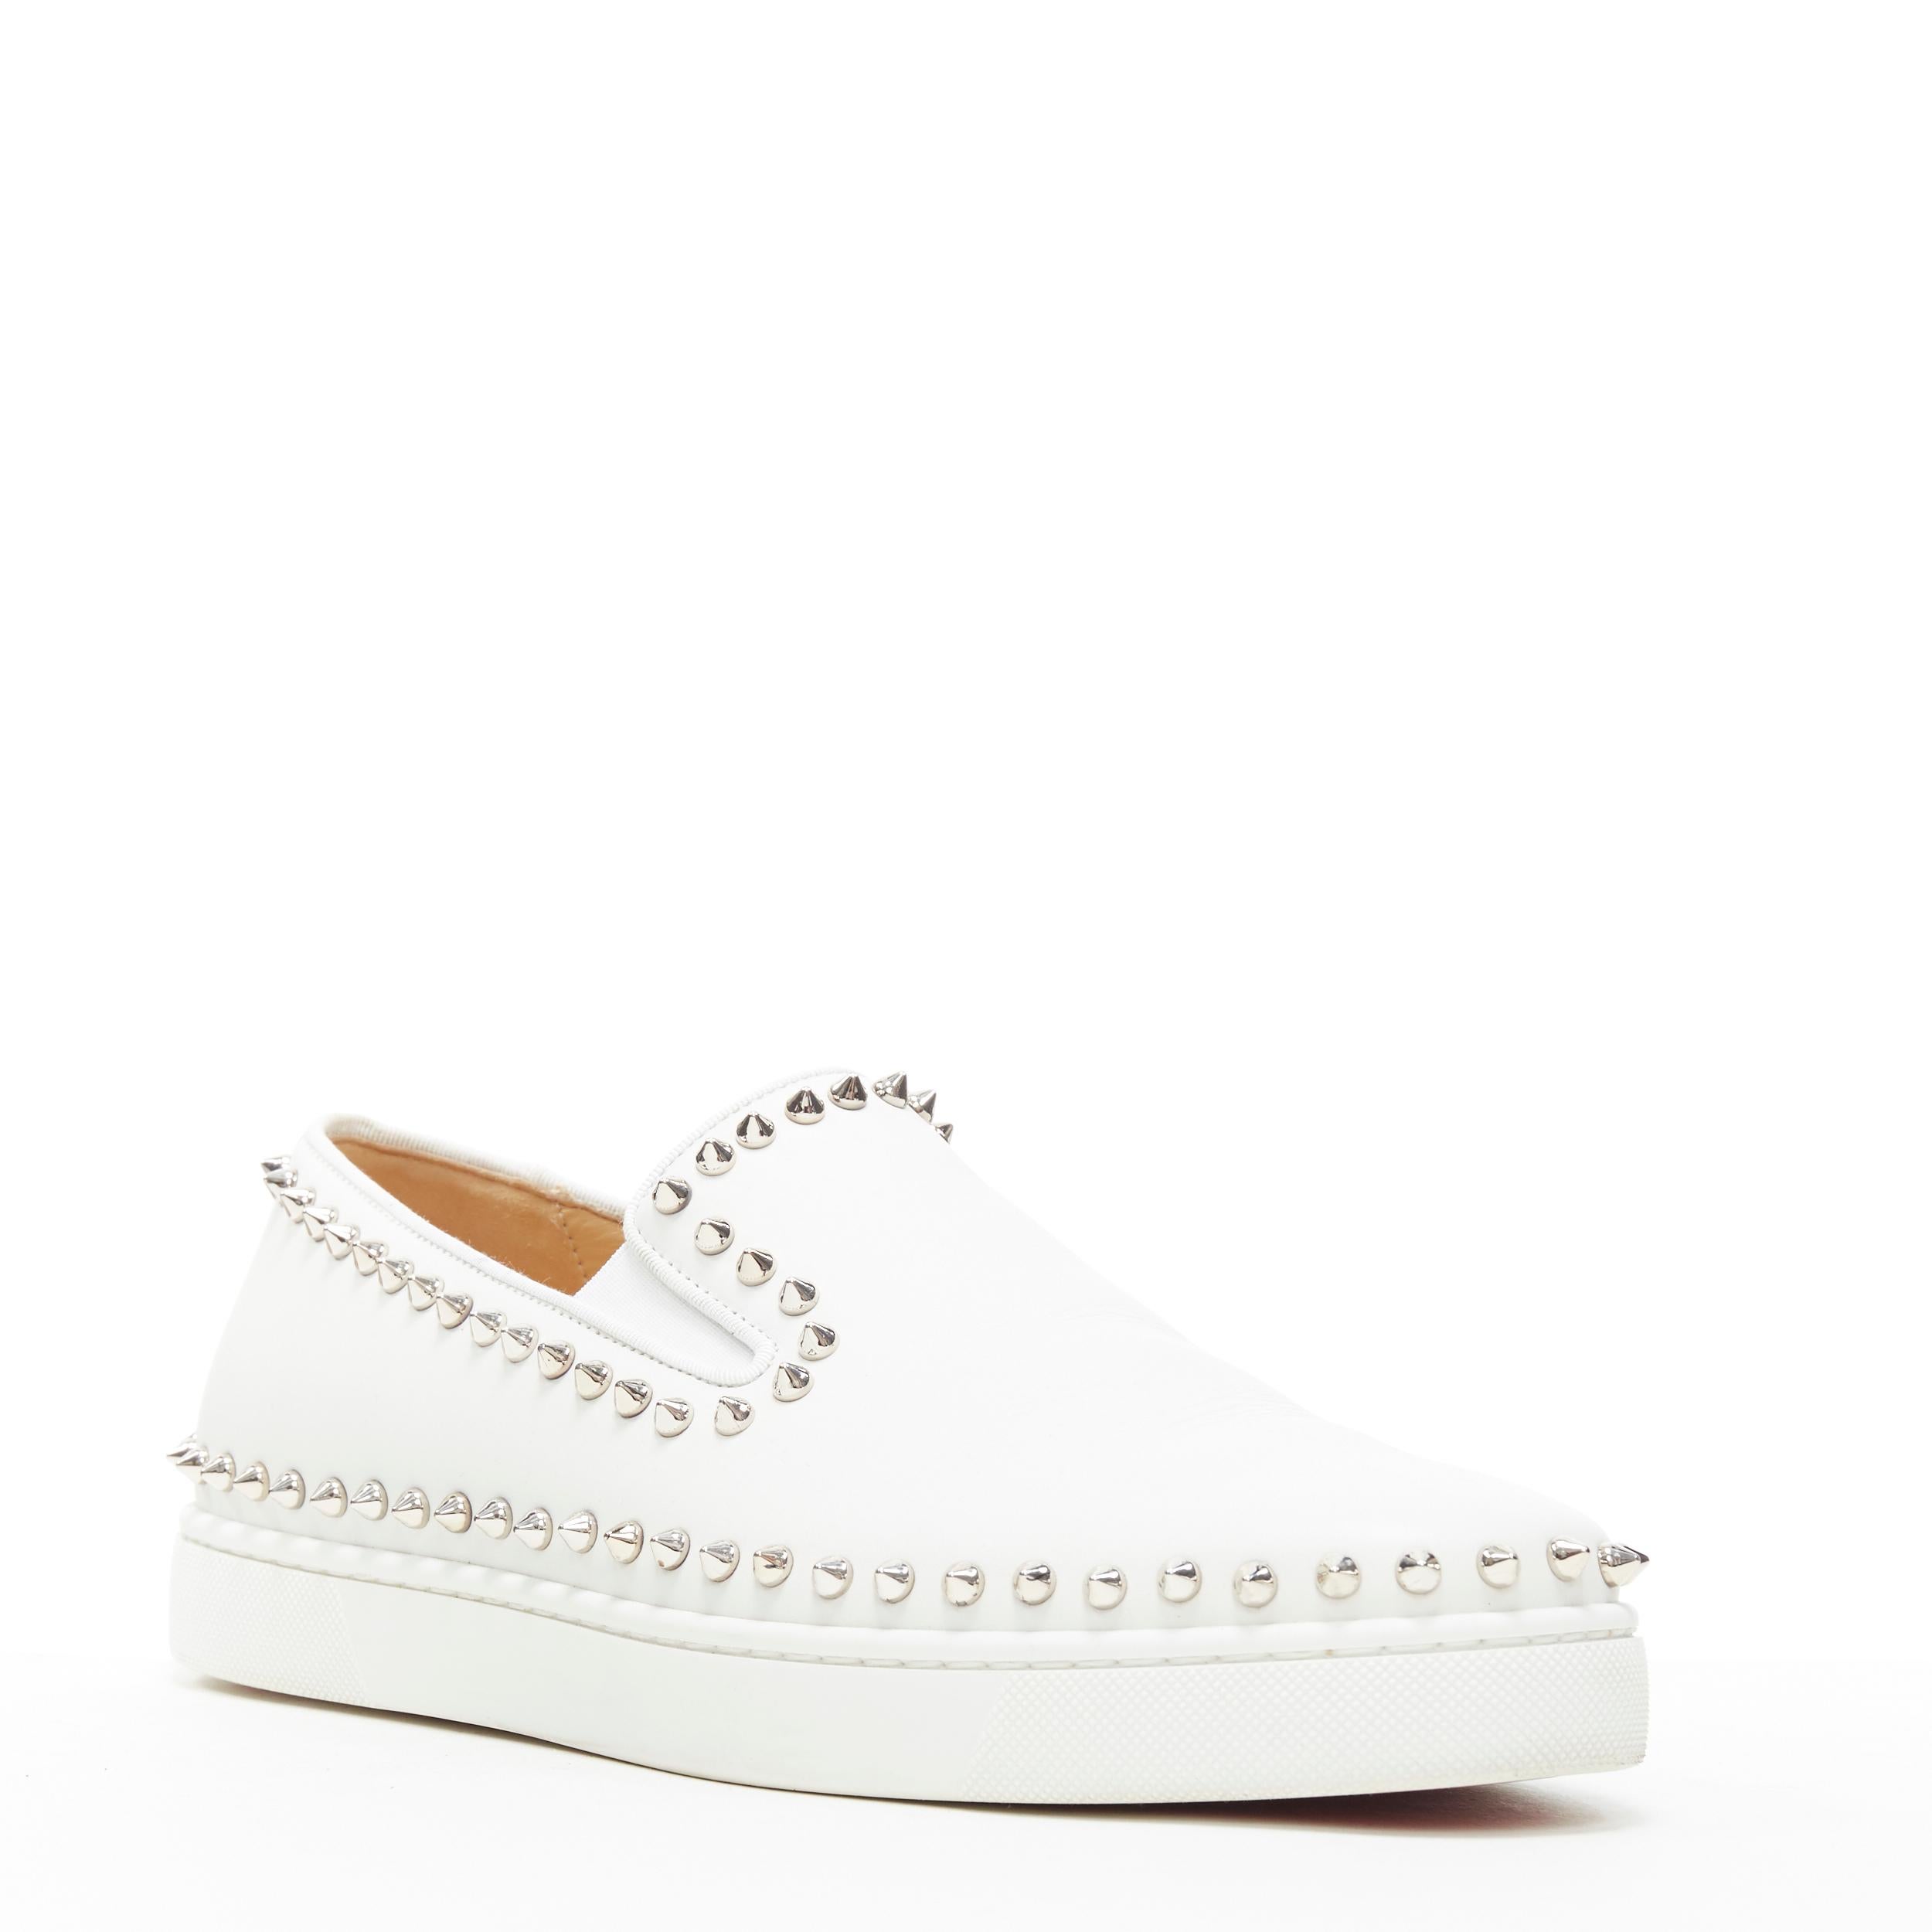 CHRISTIAN LOUBOUTIN white leather silver spike stud low top skate sneakerss EU42
Brand: Christian Louboutin
Designer: Christian Louboutin
Model Name / Style: Low top sneaker
Material: Leather
Color: White
Pattern: Solid
Closure: Slip on
Extra